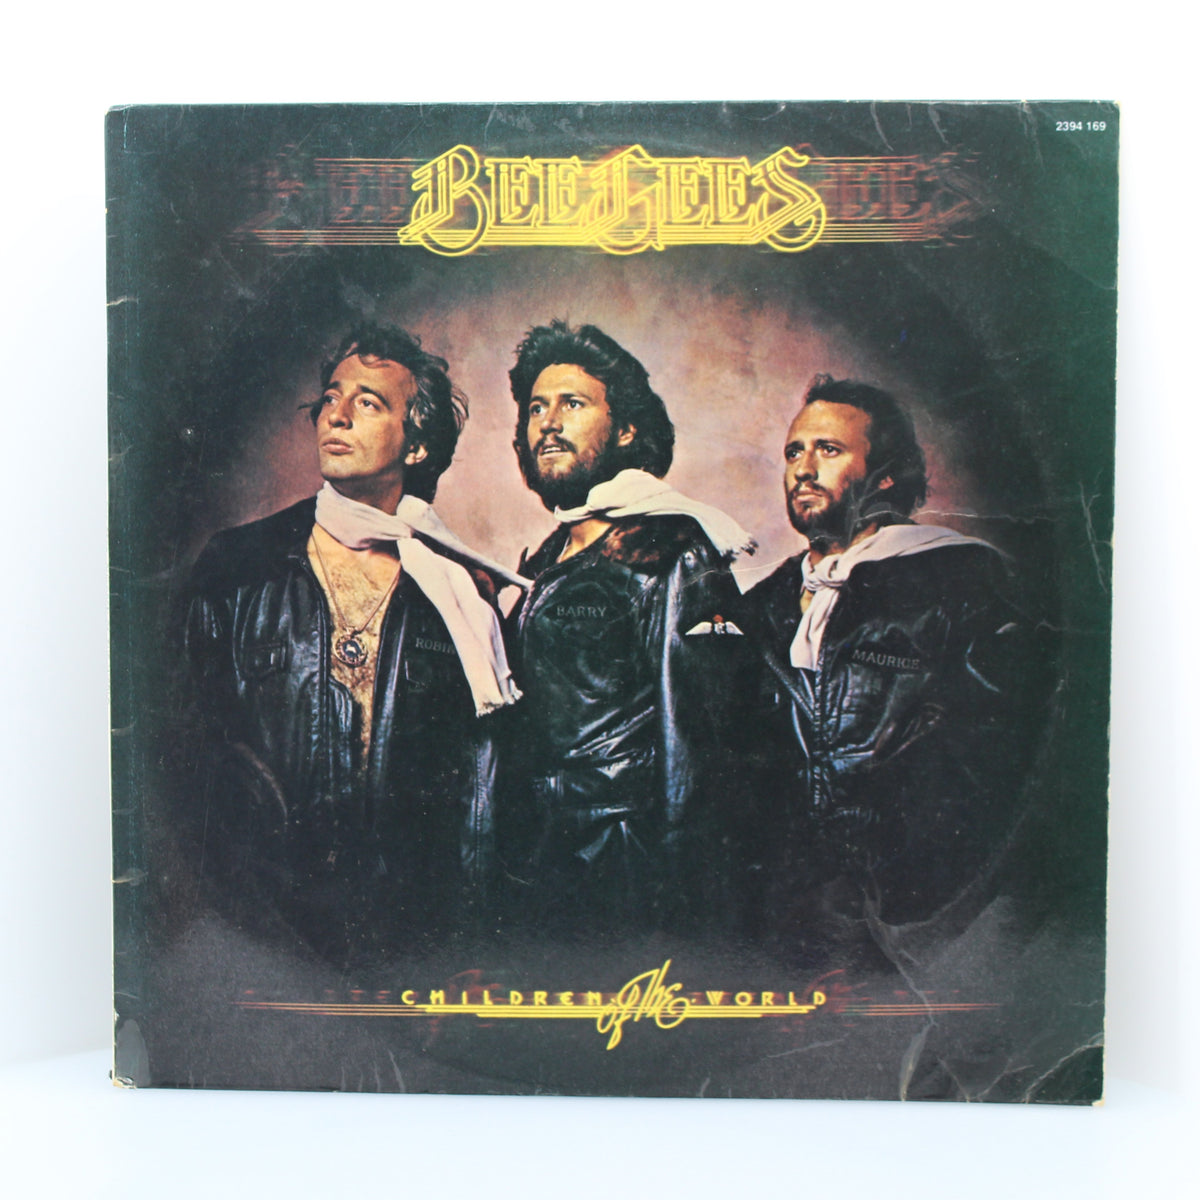 Bee Gees - Children Of The World, Vinyl, LP 33Rpm, Portugal 1976